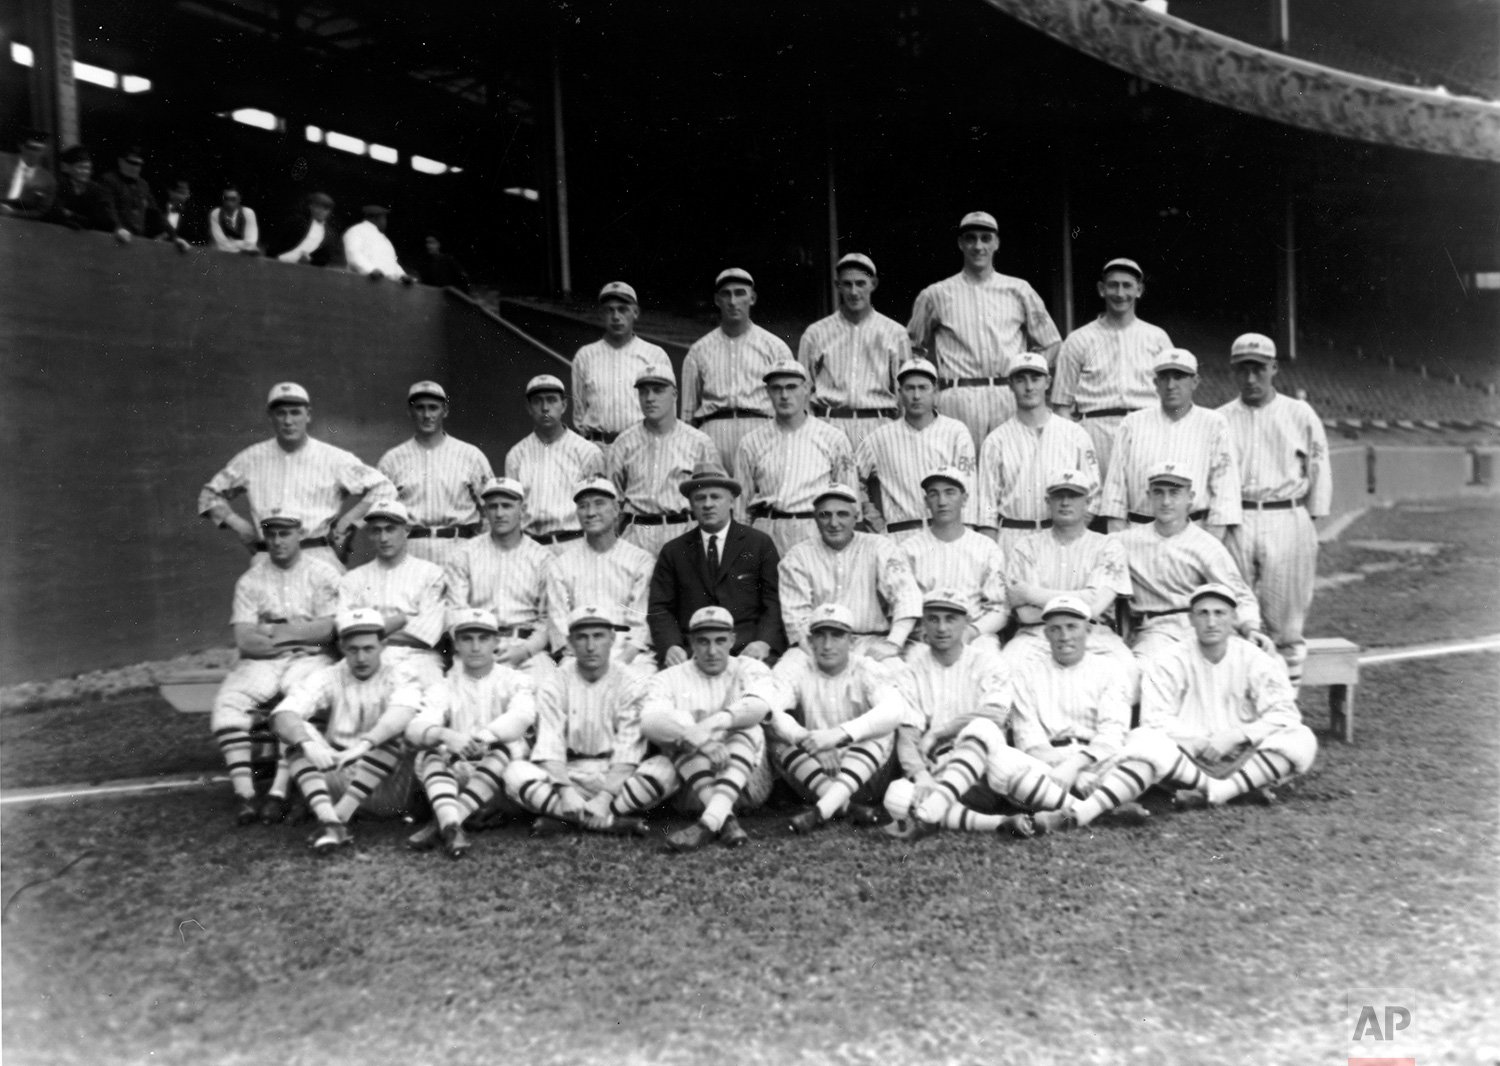  The New York Giants baseball team, winners of the 1922 National League pennant, pose at the Polo Grounds in New York City on Sept. 26, 1922.  Outfielder Casey Stengel is seated in the second row, third from left.  (AP Photo) 